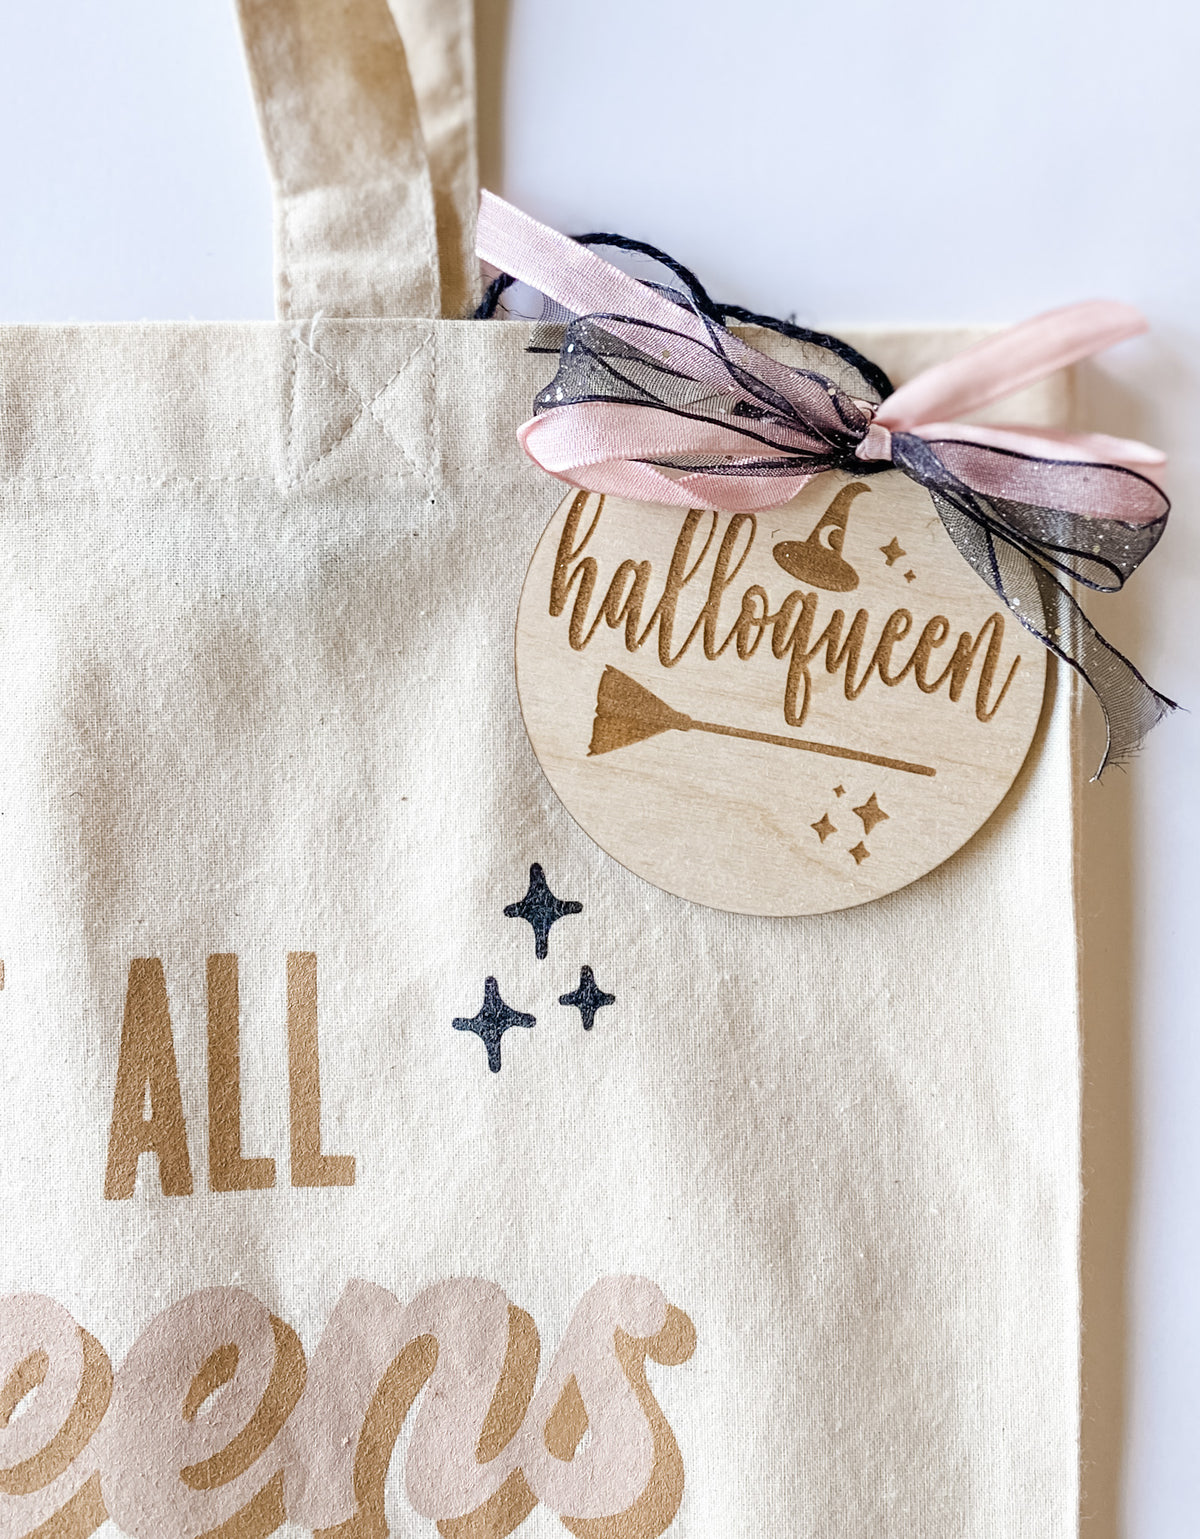 Not All Queens Wear Crowns Canvas Tote (tag not included)